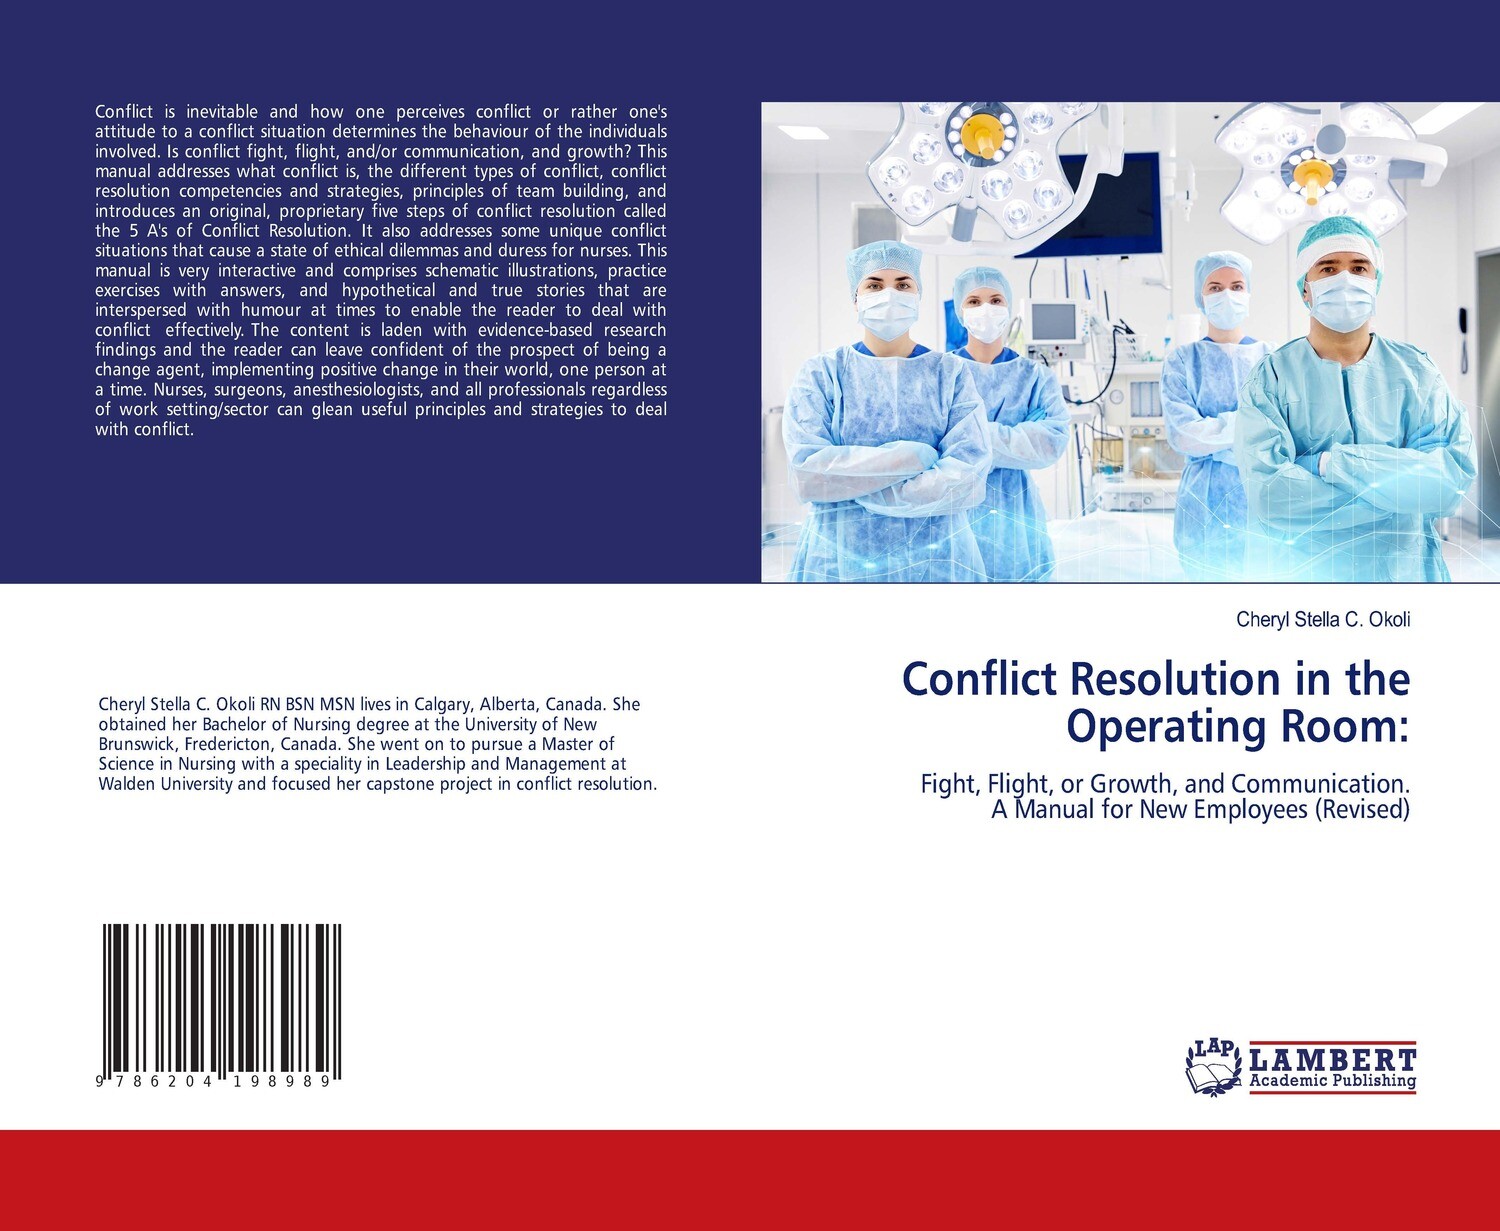 Conflict Resolution in the Operating Room: Fight, Flight, or Growth and Communication. A Manual for New Employees (Revised).  2021 Version